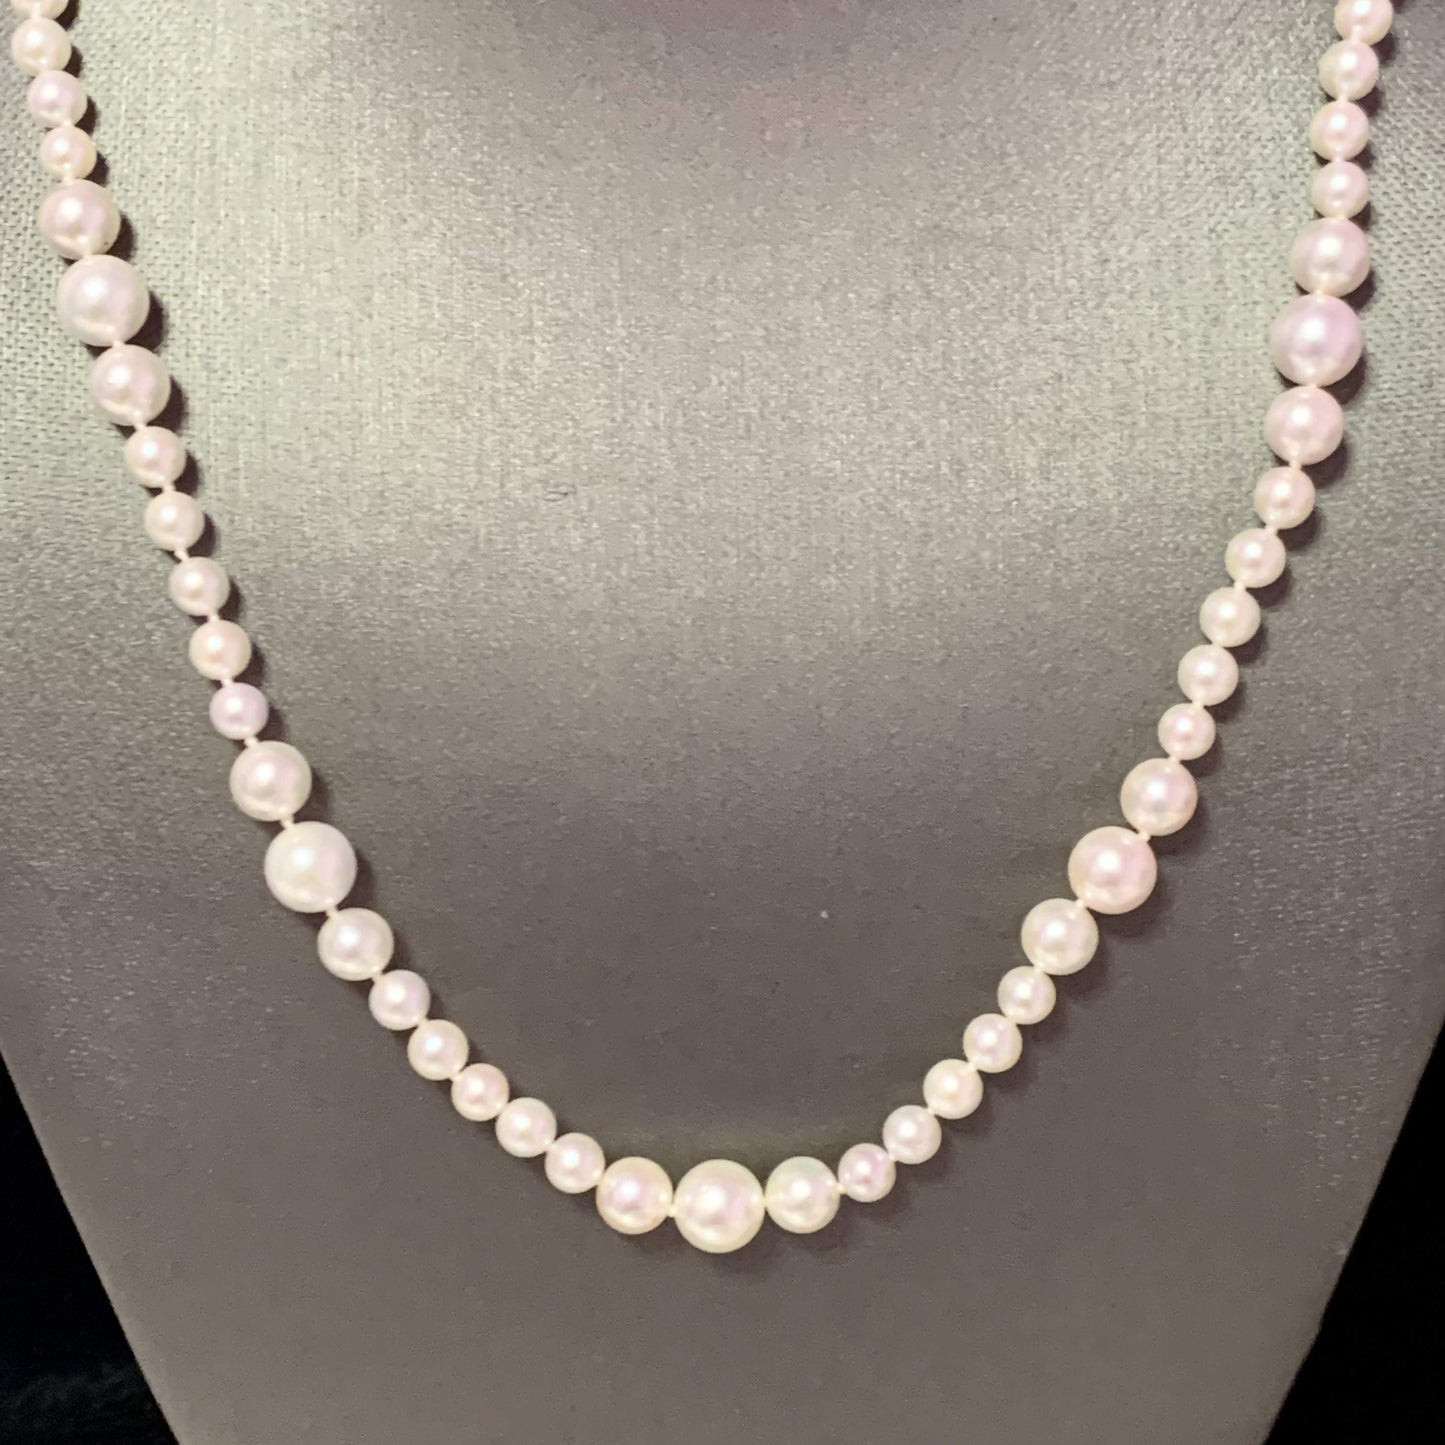 Akoya Pearl Necklace 14k Yellow Gold 19.5" 8.5 mm Certified $3,950 114446 - Certified Estate Jewelry